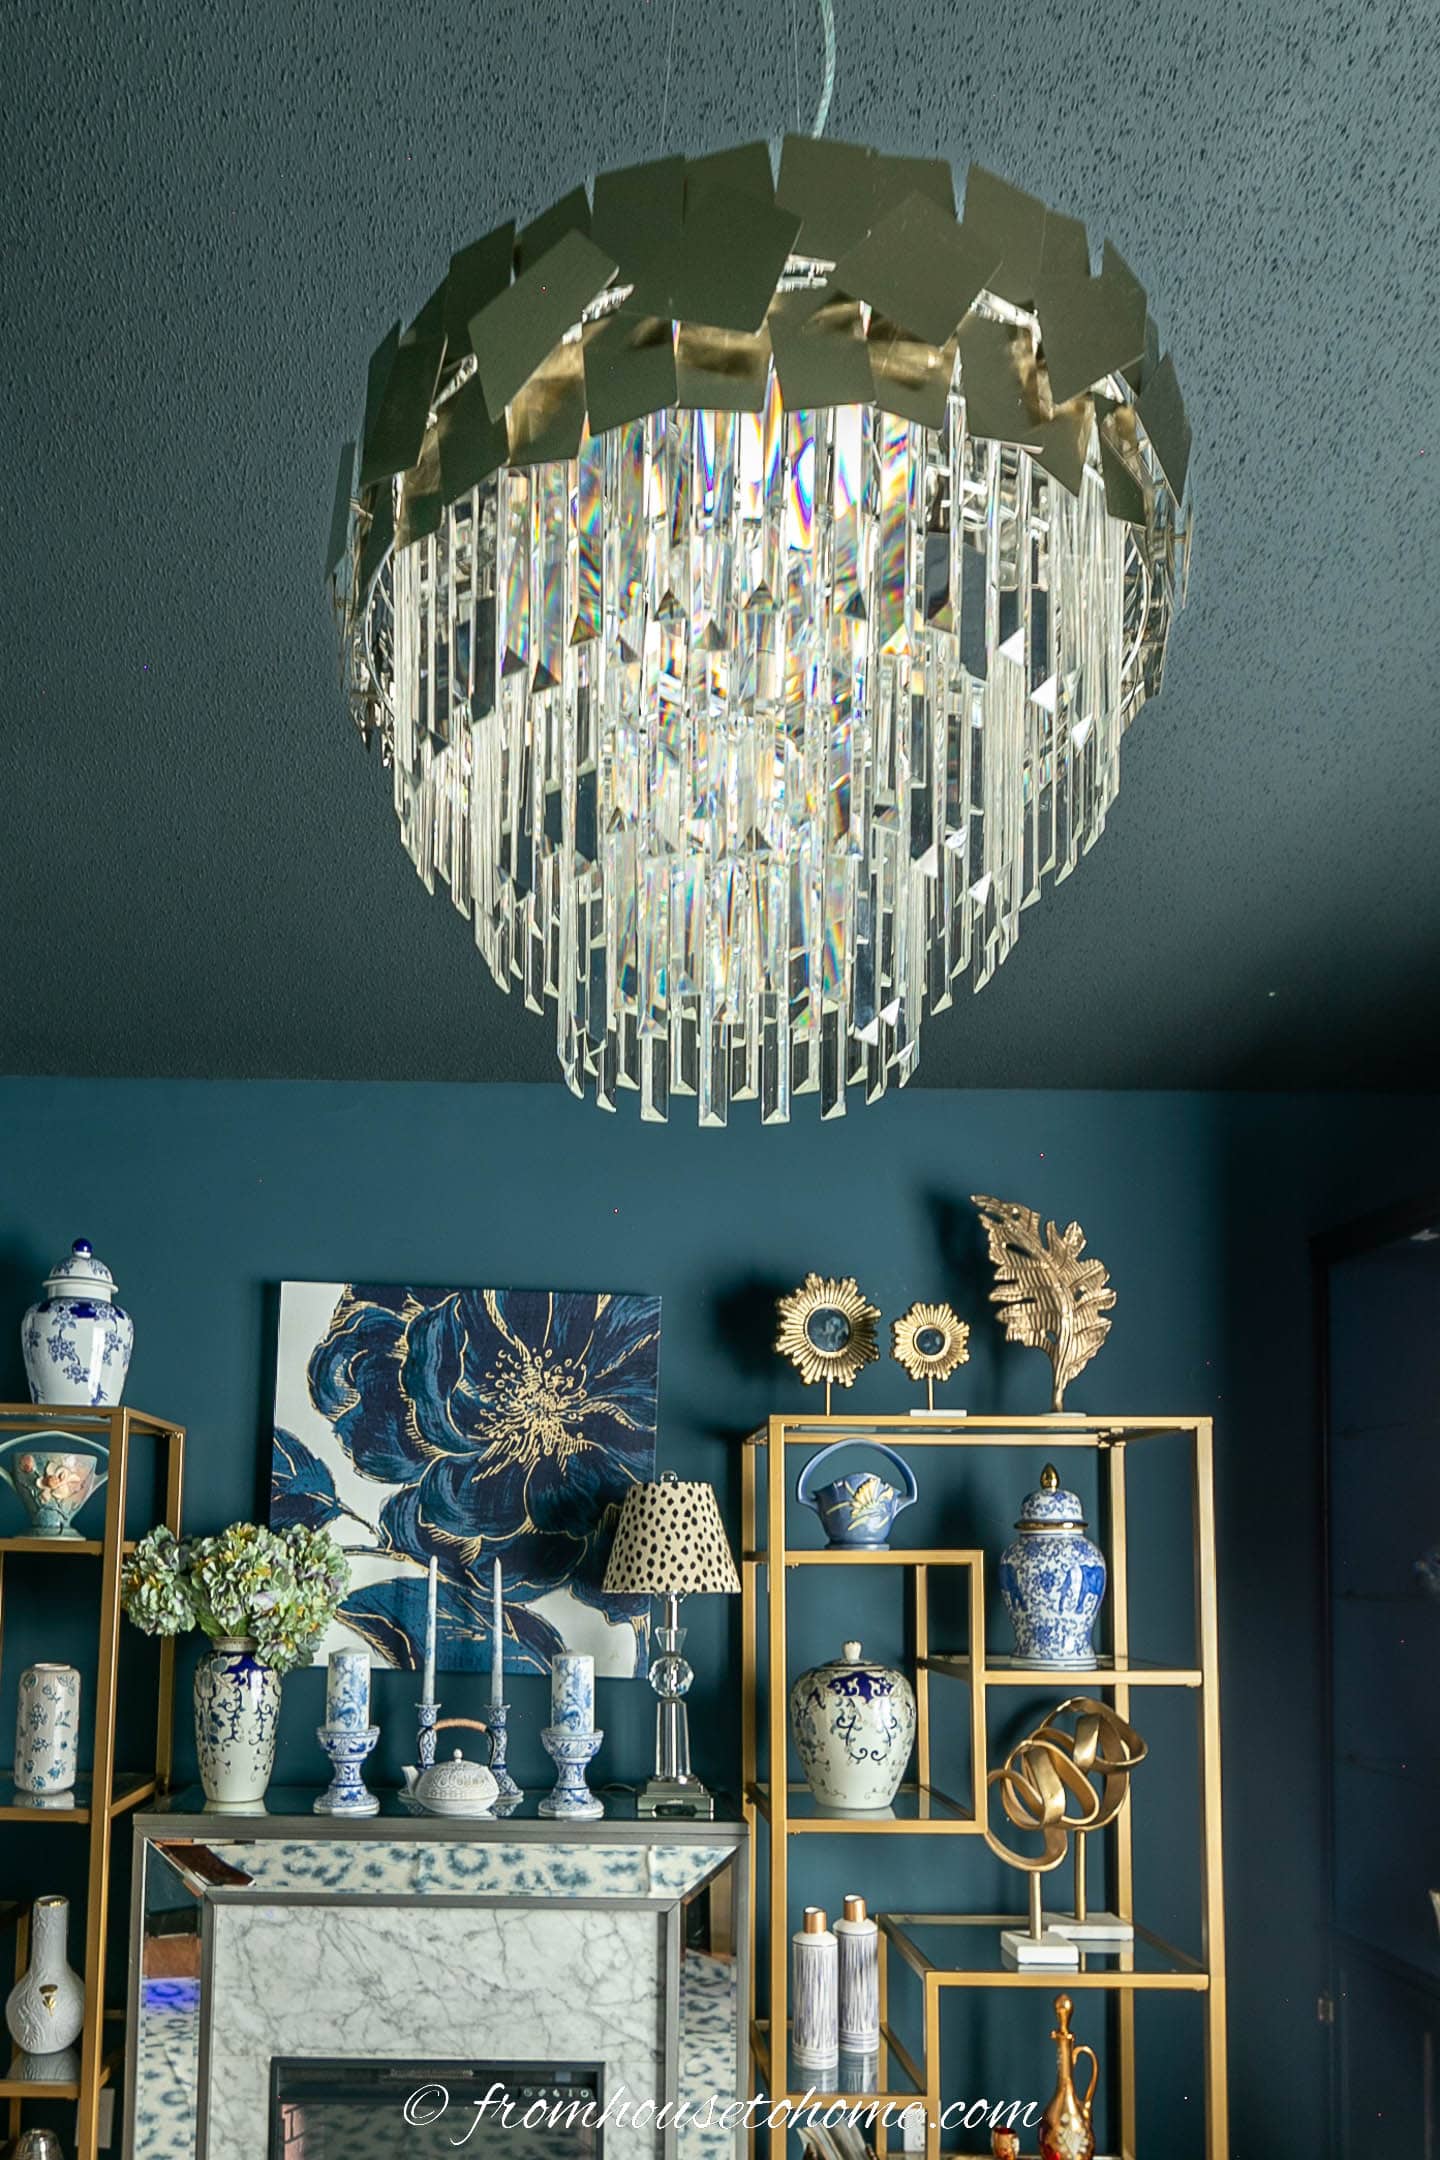 A large gold and crystal chandelier in front of a fireplace and a gold shelf